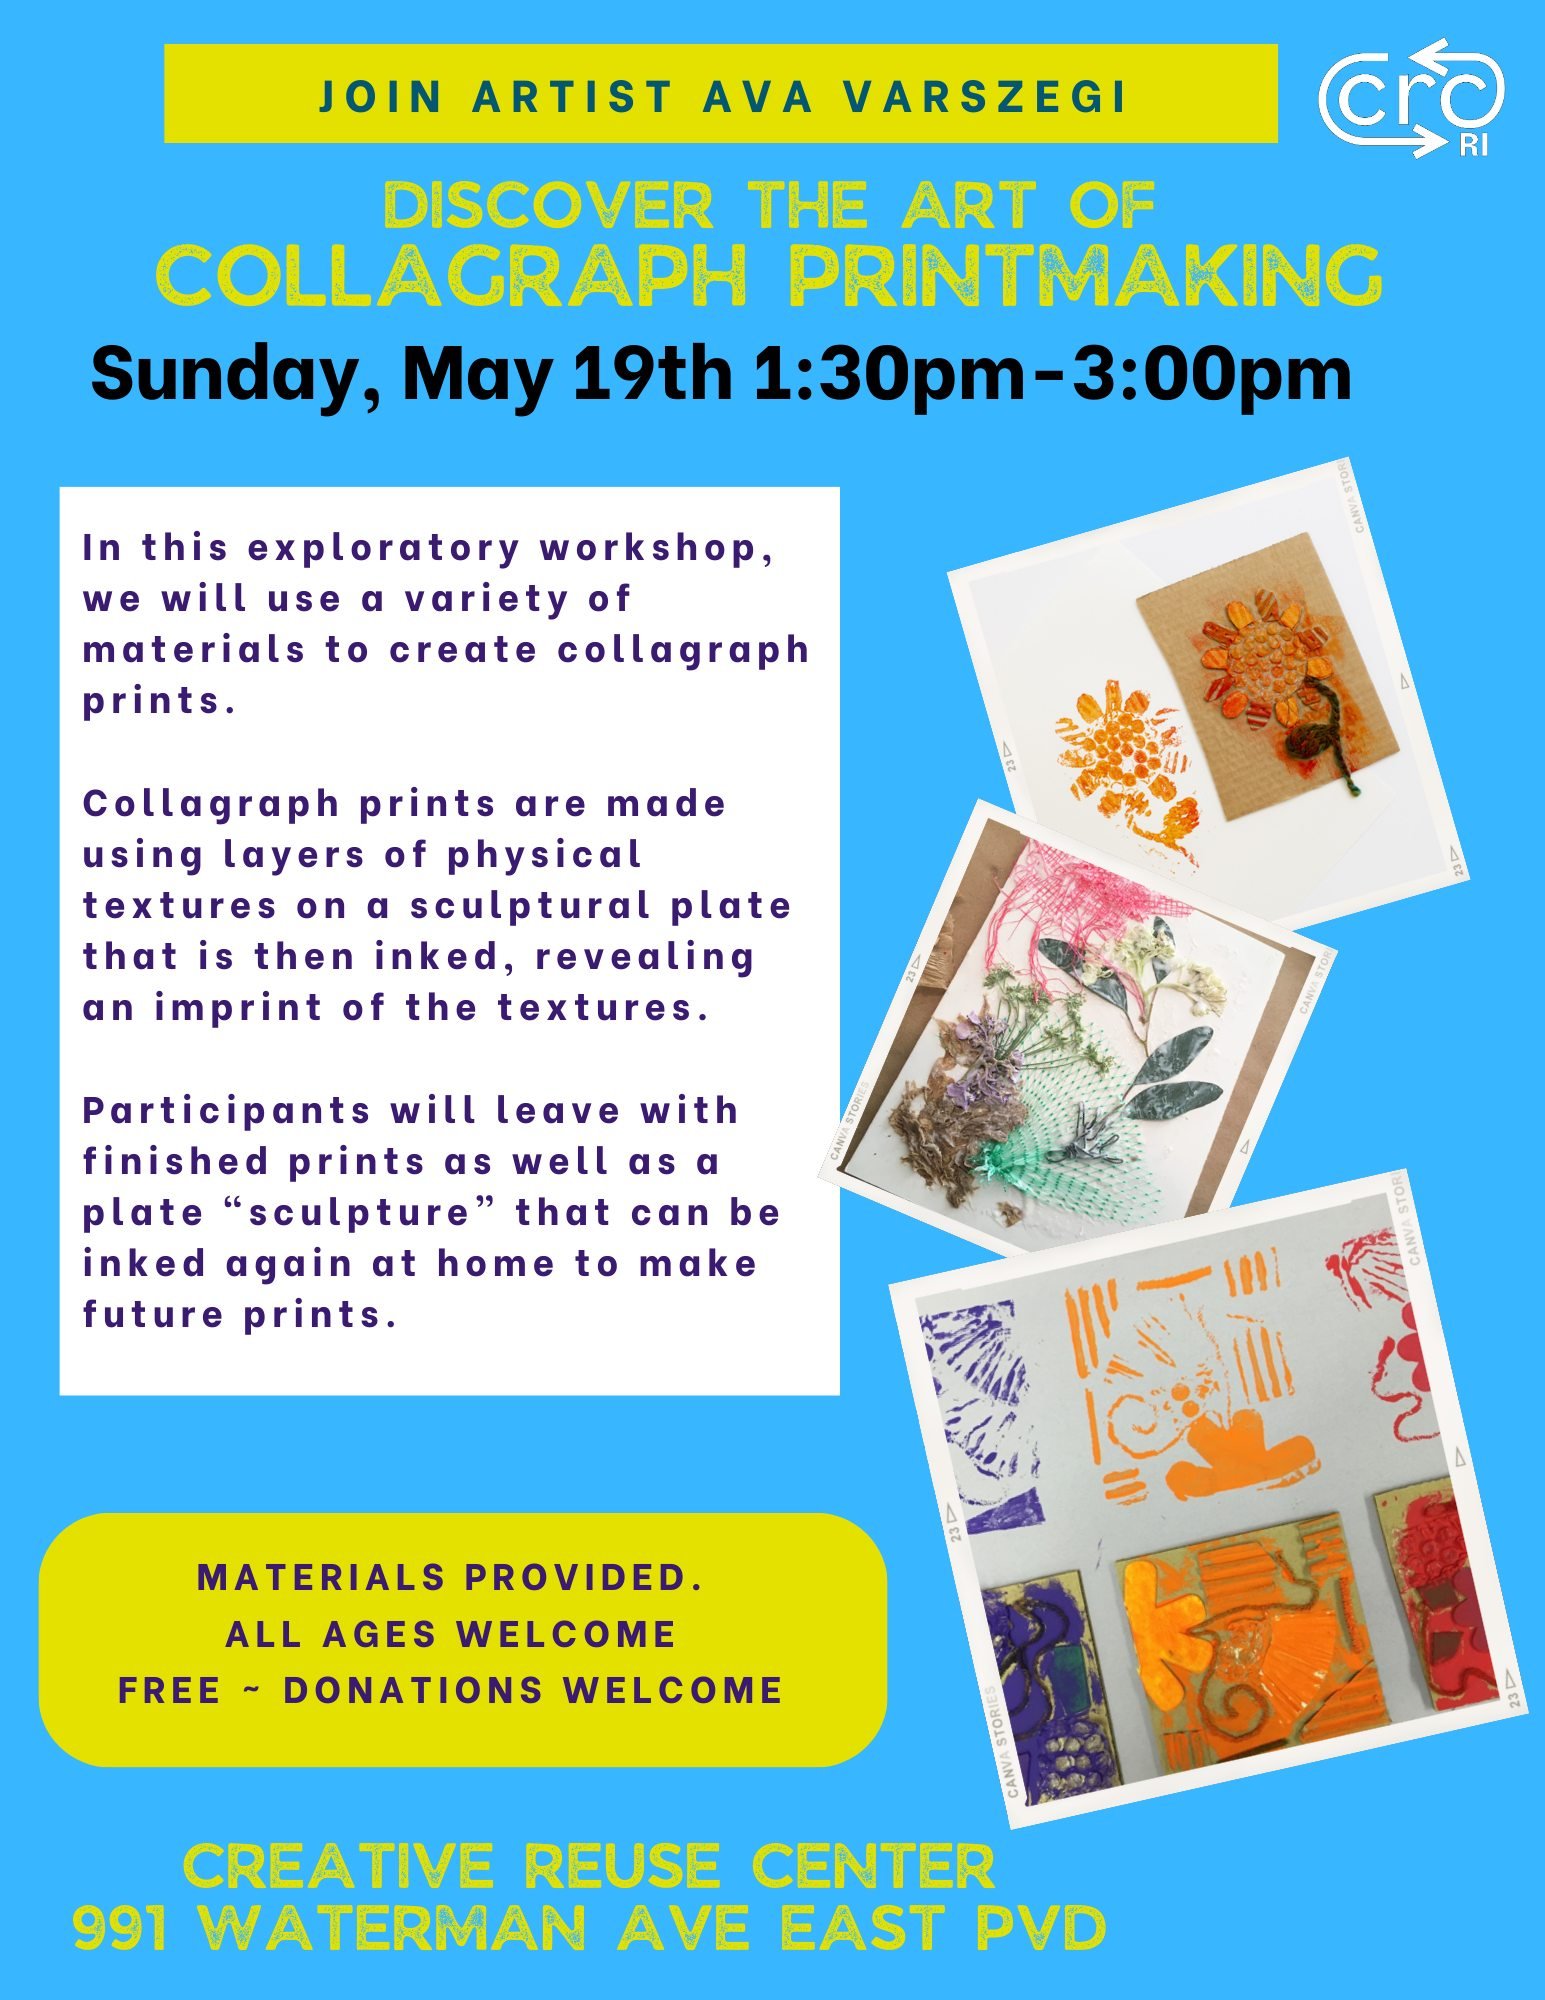 Please save the date! 

On Sunday May 19th from 1:30-3pm we will have a Collagraph Printmaking Workshop with Ava Varszegi. 

In this exploratory workshop, we&rsquo;ll be using a variety of CRC materials to create collagraph prints. 

Collagraph print